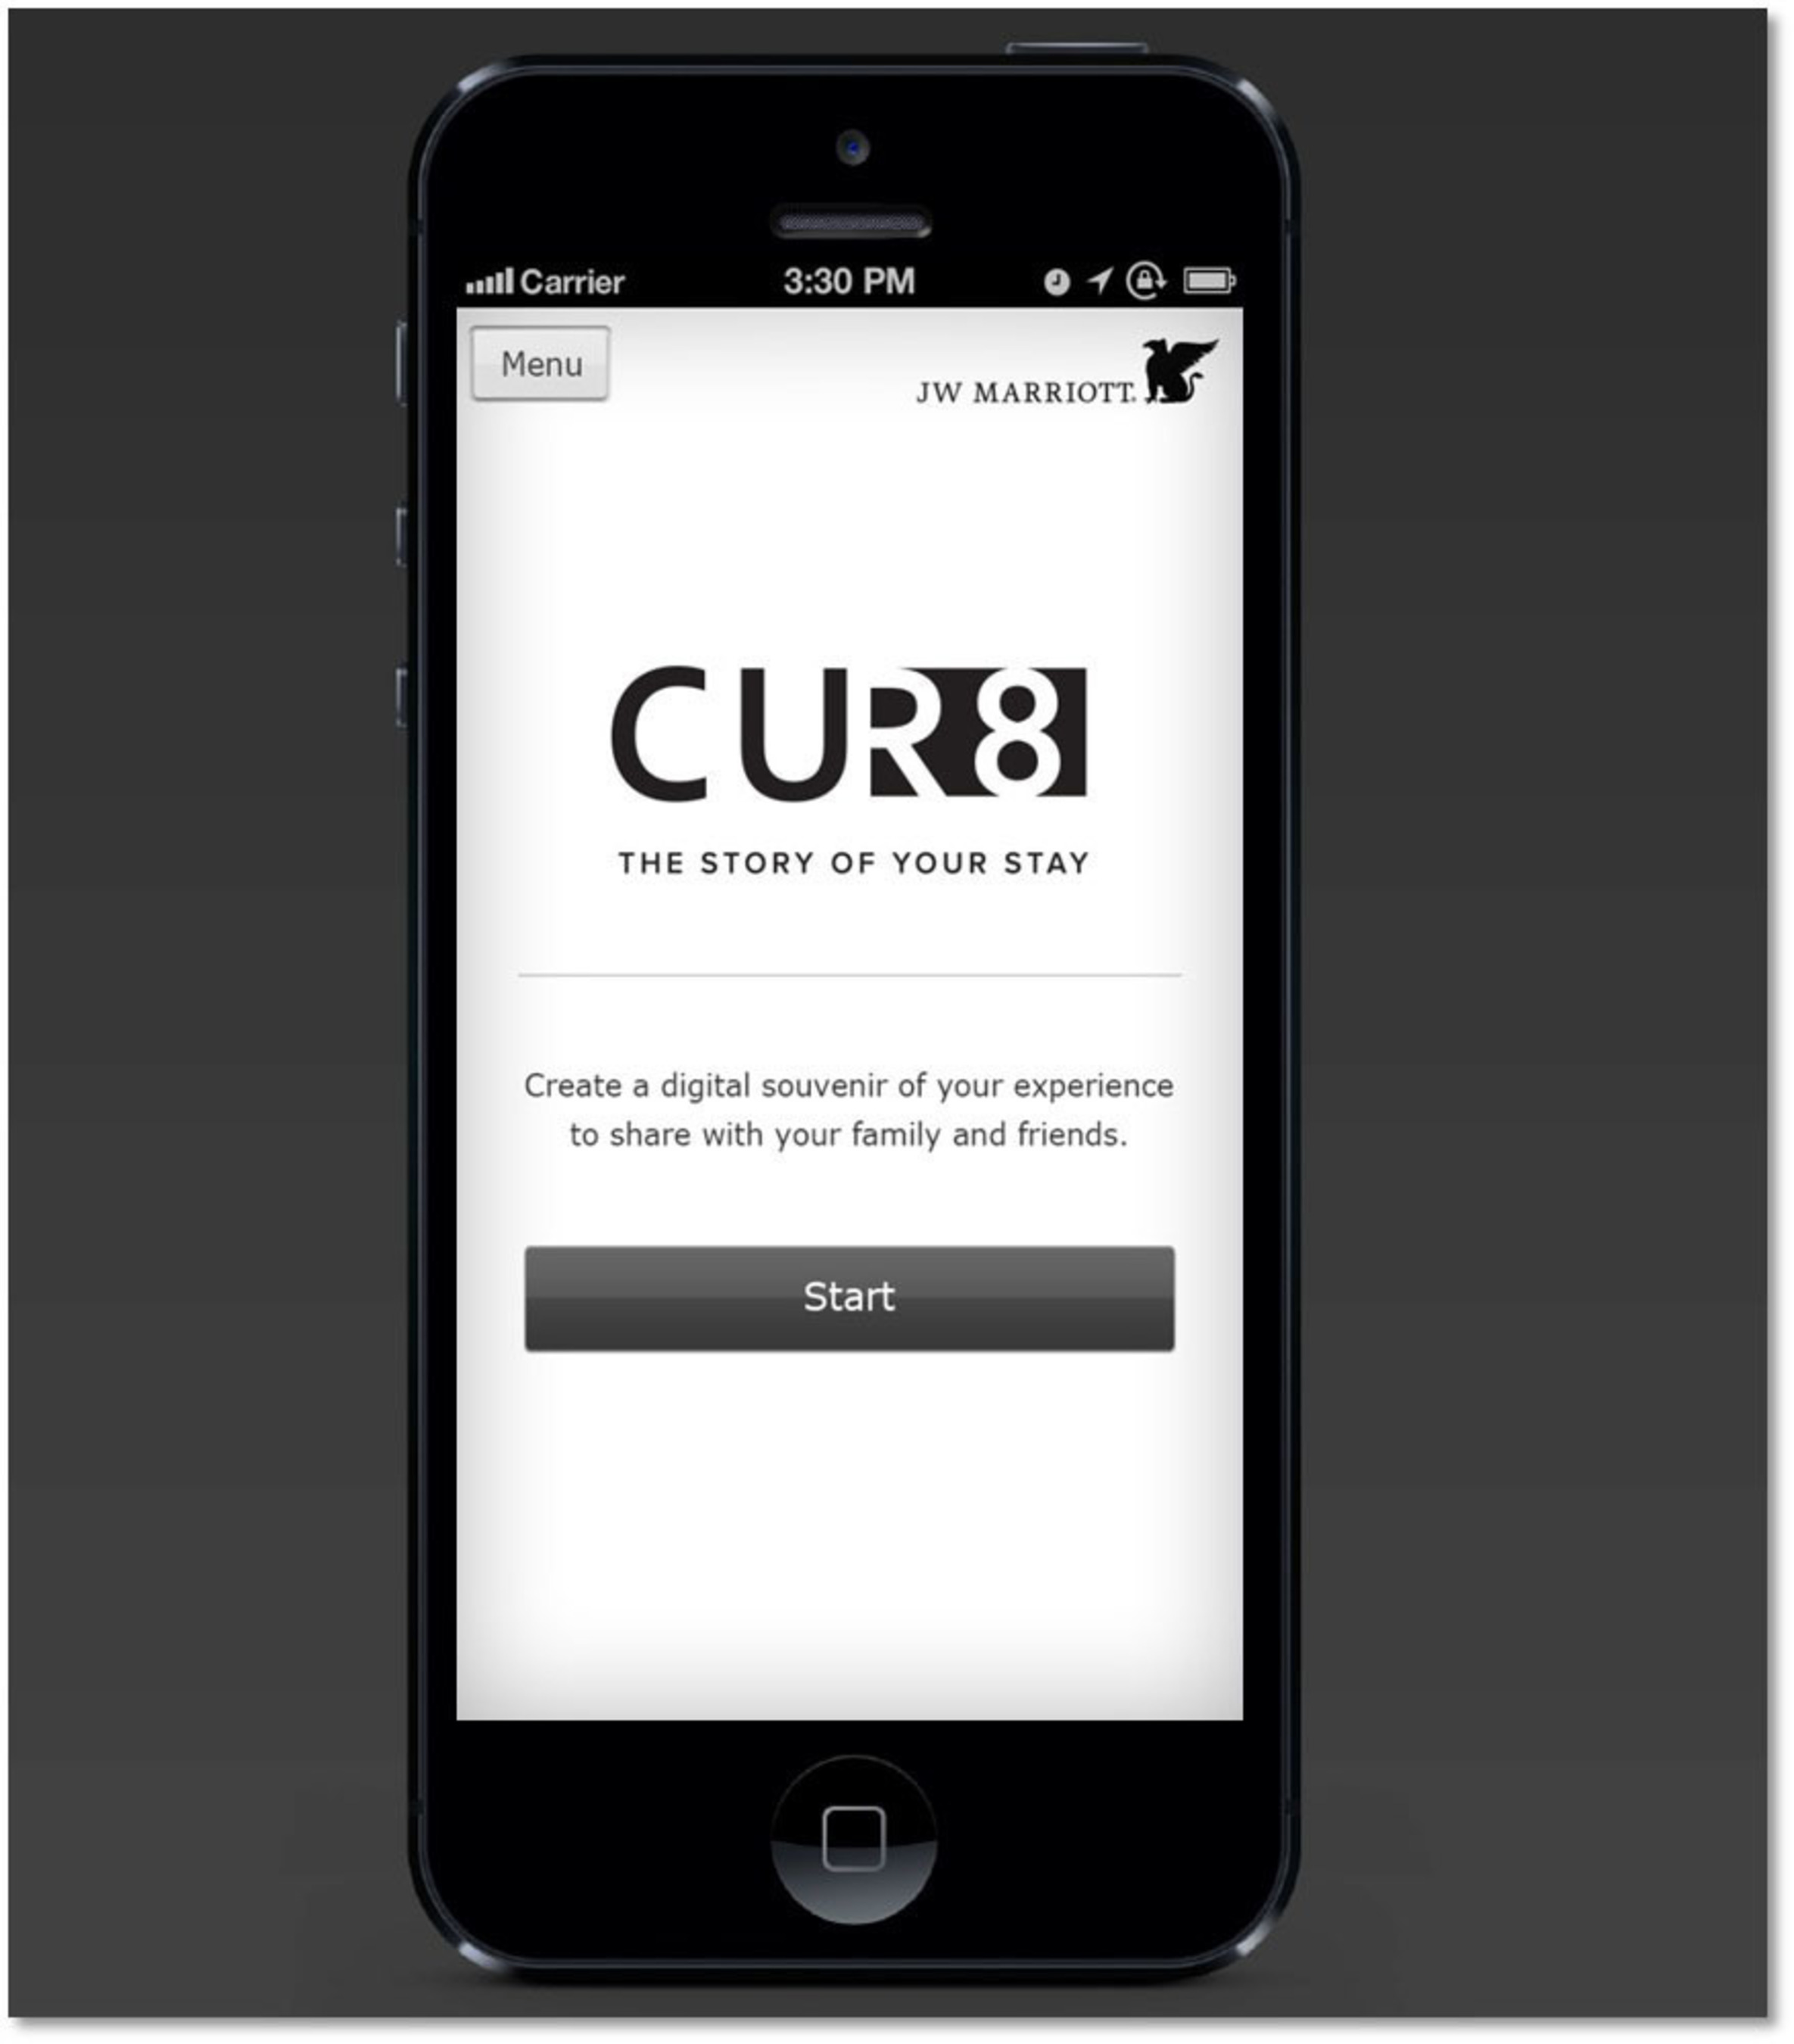 JW Marriott Hotels & Resorts Launches CUR8 App for Travelers (PRNewsFoto/JW Marriott Hotels & Resorts)